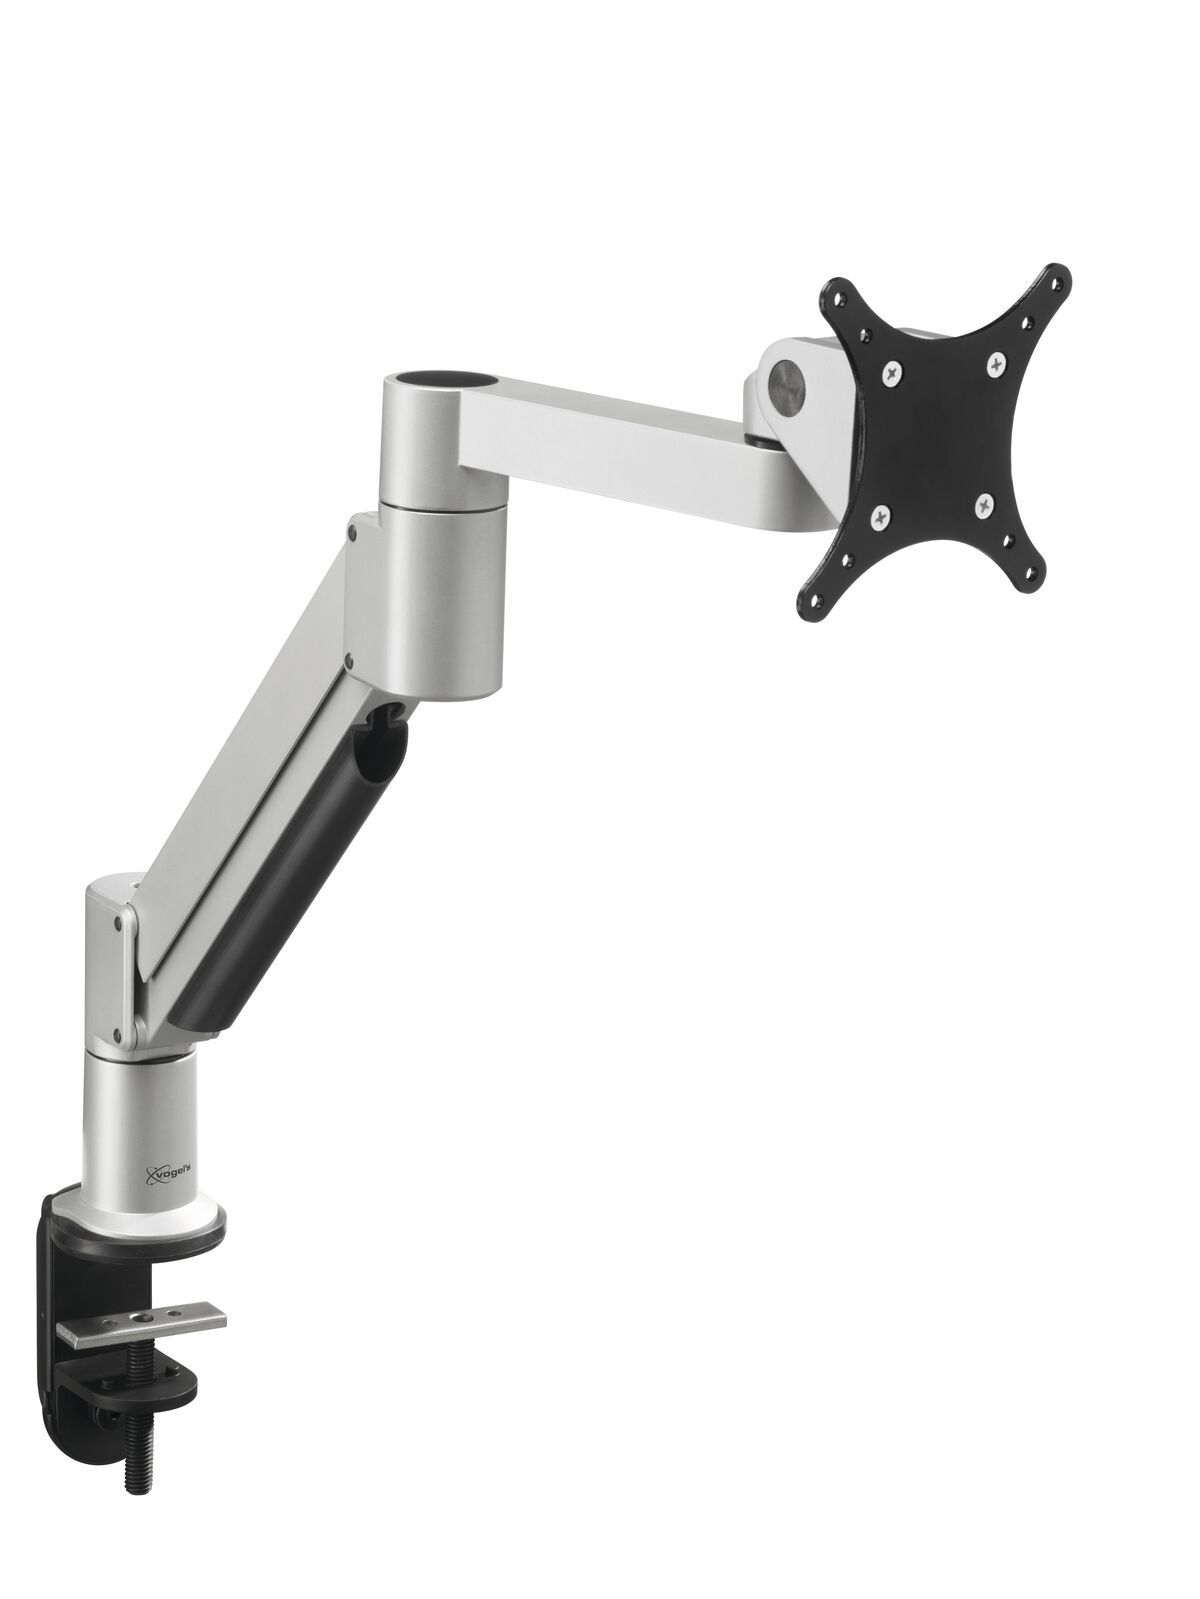 Vogel's PFD 8543 Monitor Arm dynamic (silver) - For monitors up to 11 kg - Ideally suited for Gaming and (Home) Office - Product